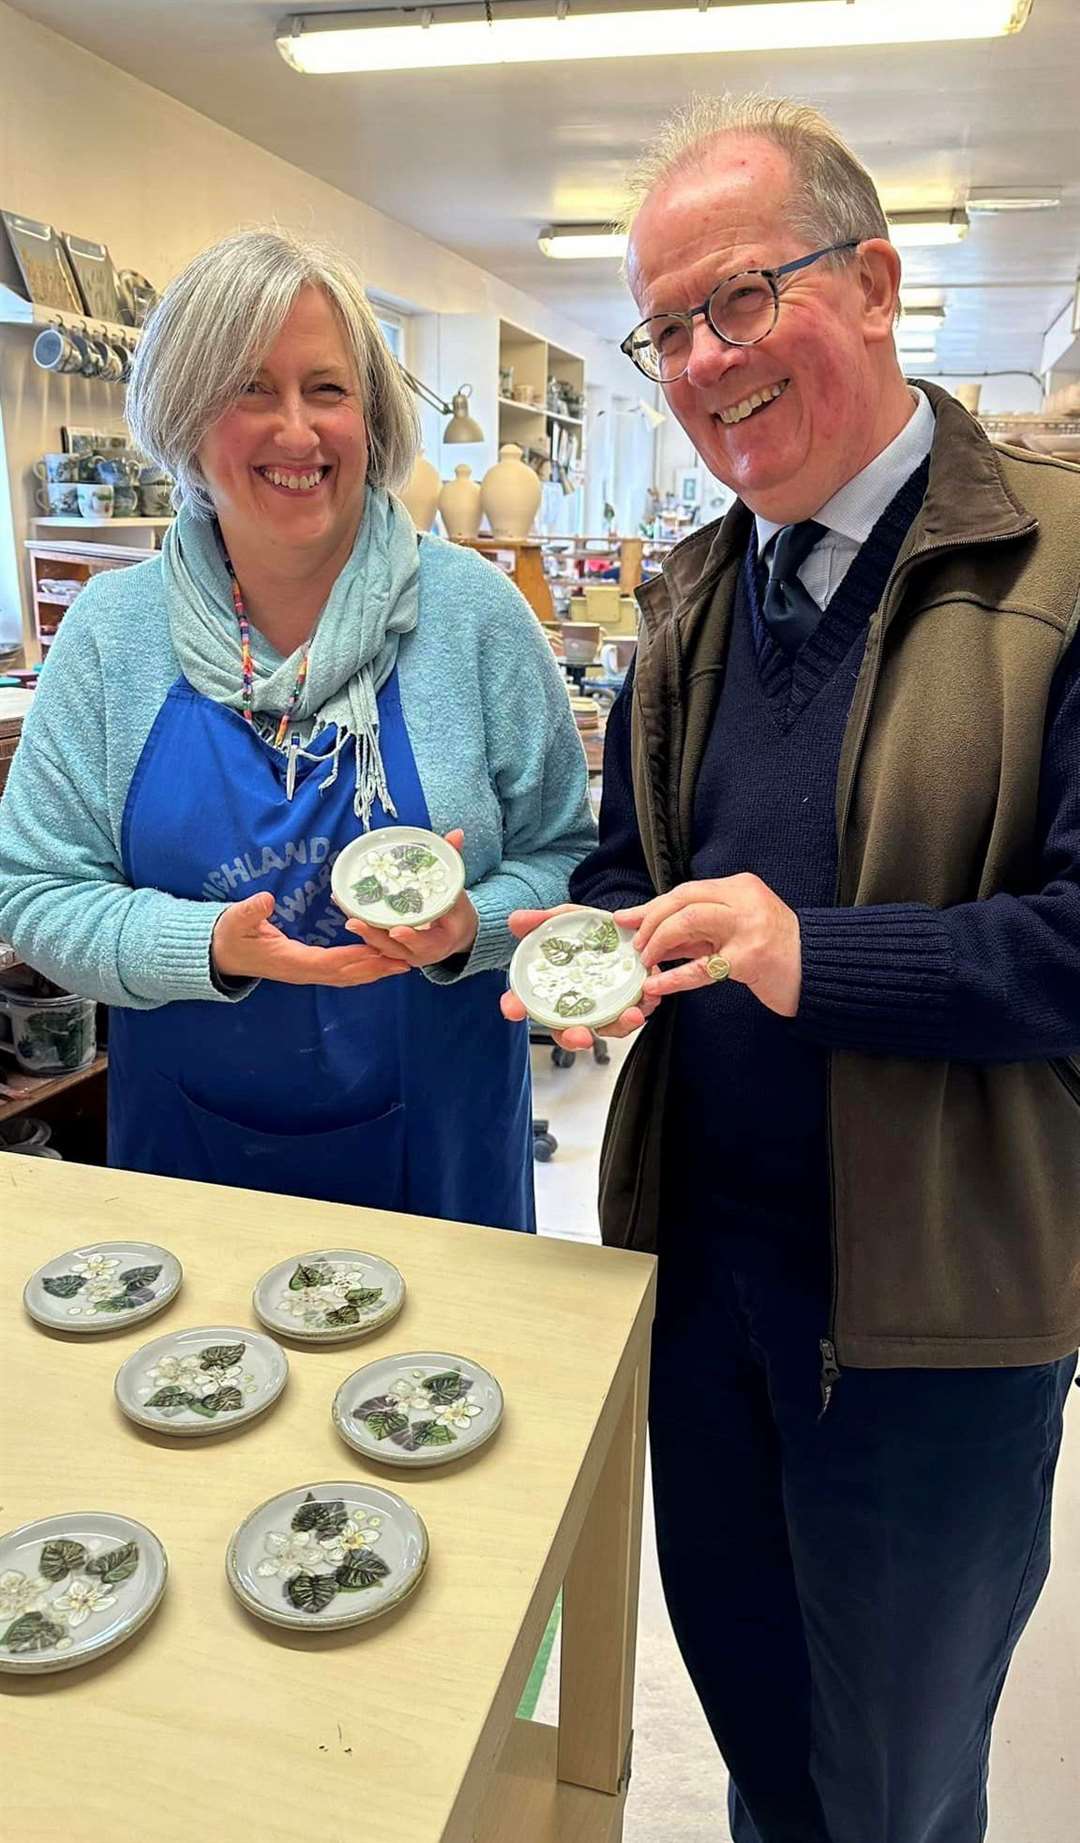 Lord Lieutenant Patrick Marriott and Tracey Aird with the specially commissioned coasters.